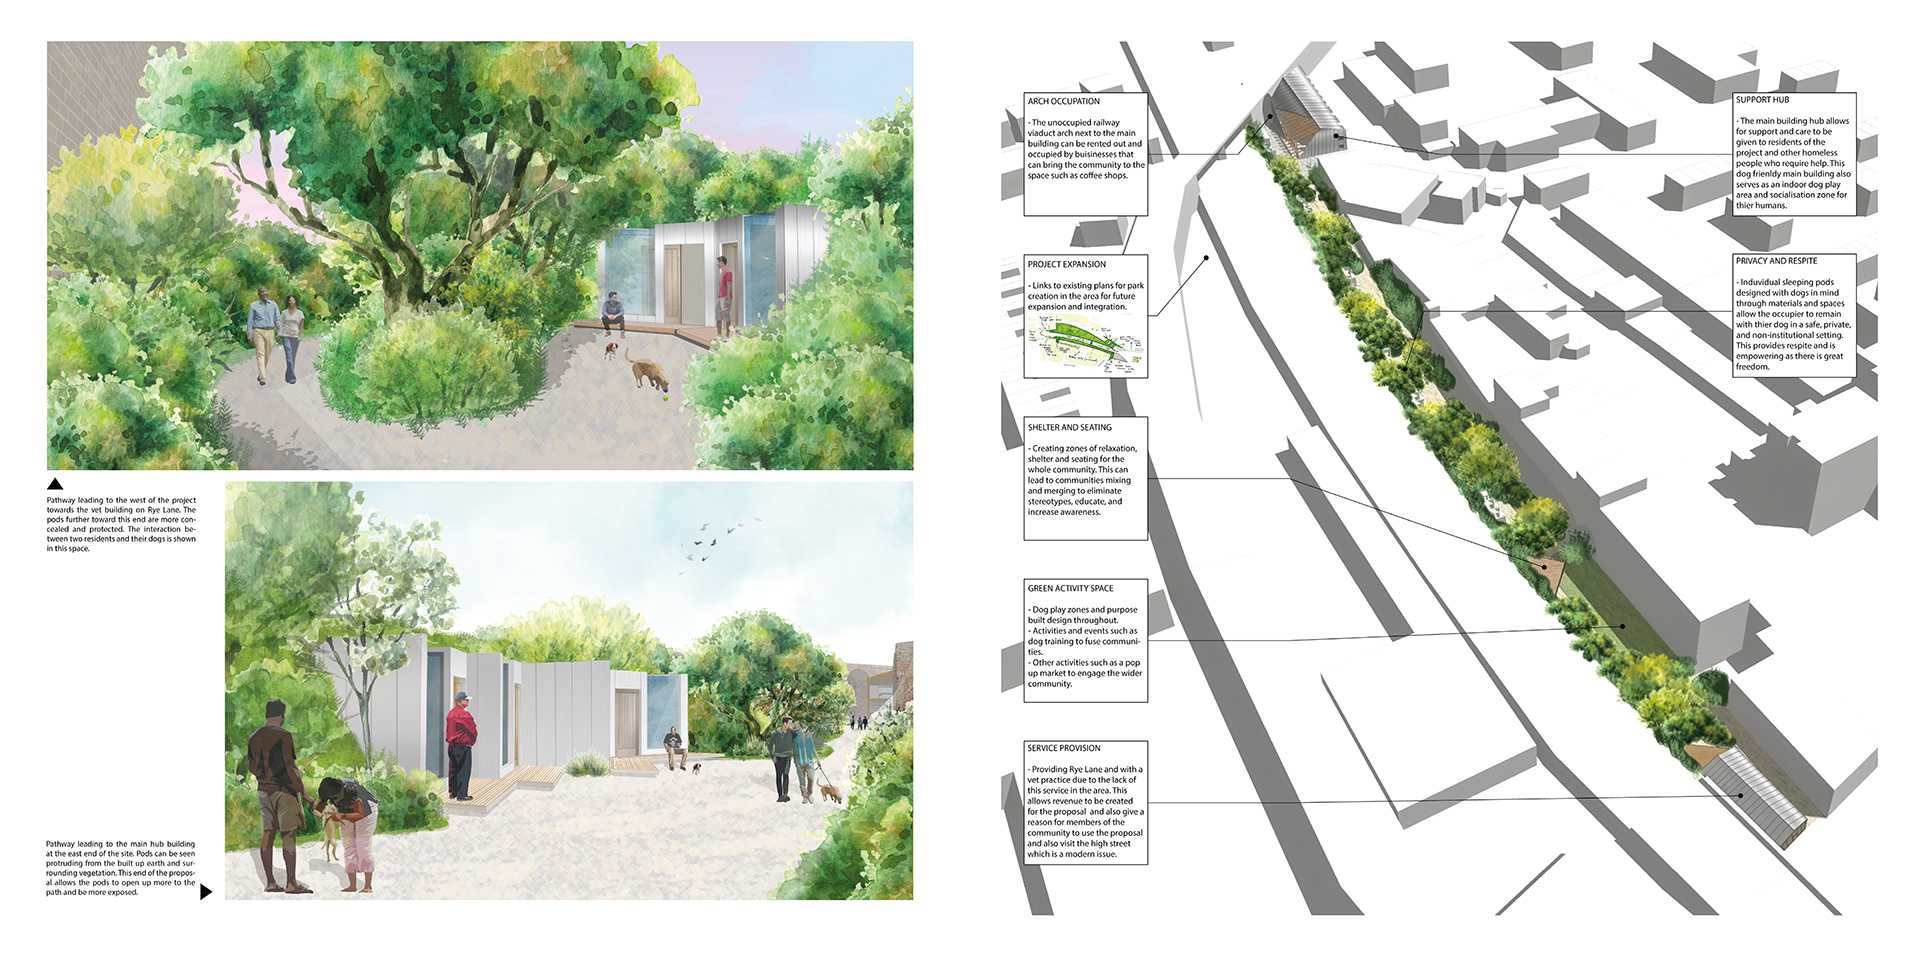 Visuals of the room pods protruding from the landscape within the park. An overview of the whole proposal is also here with the project's links to the wider community.